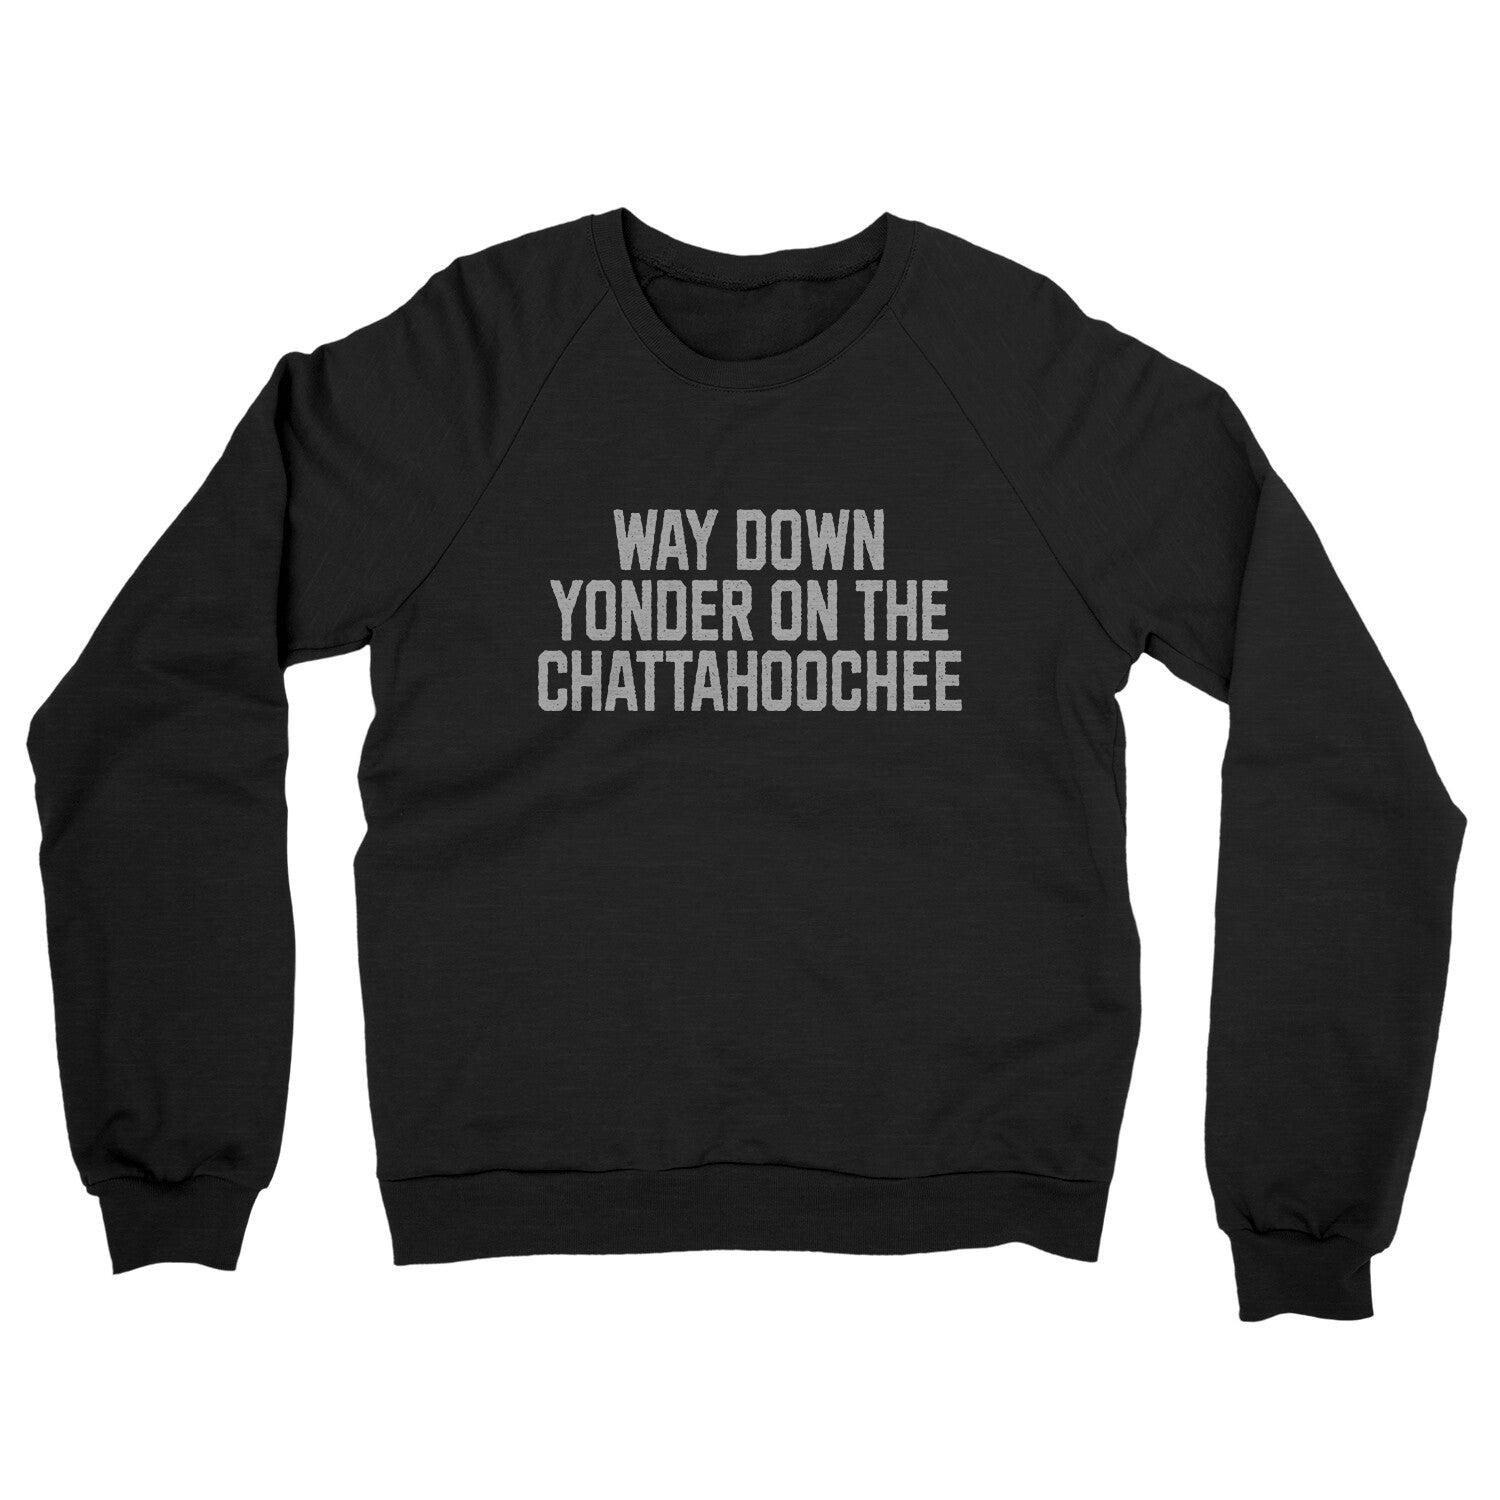 Way Down Yonder on the Chattahoochee in Black Color